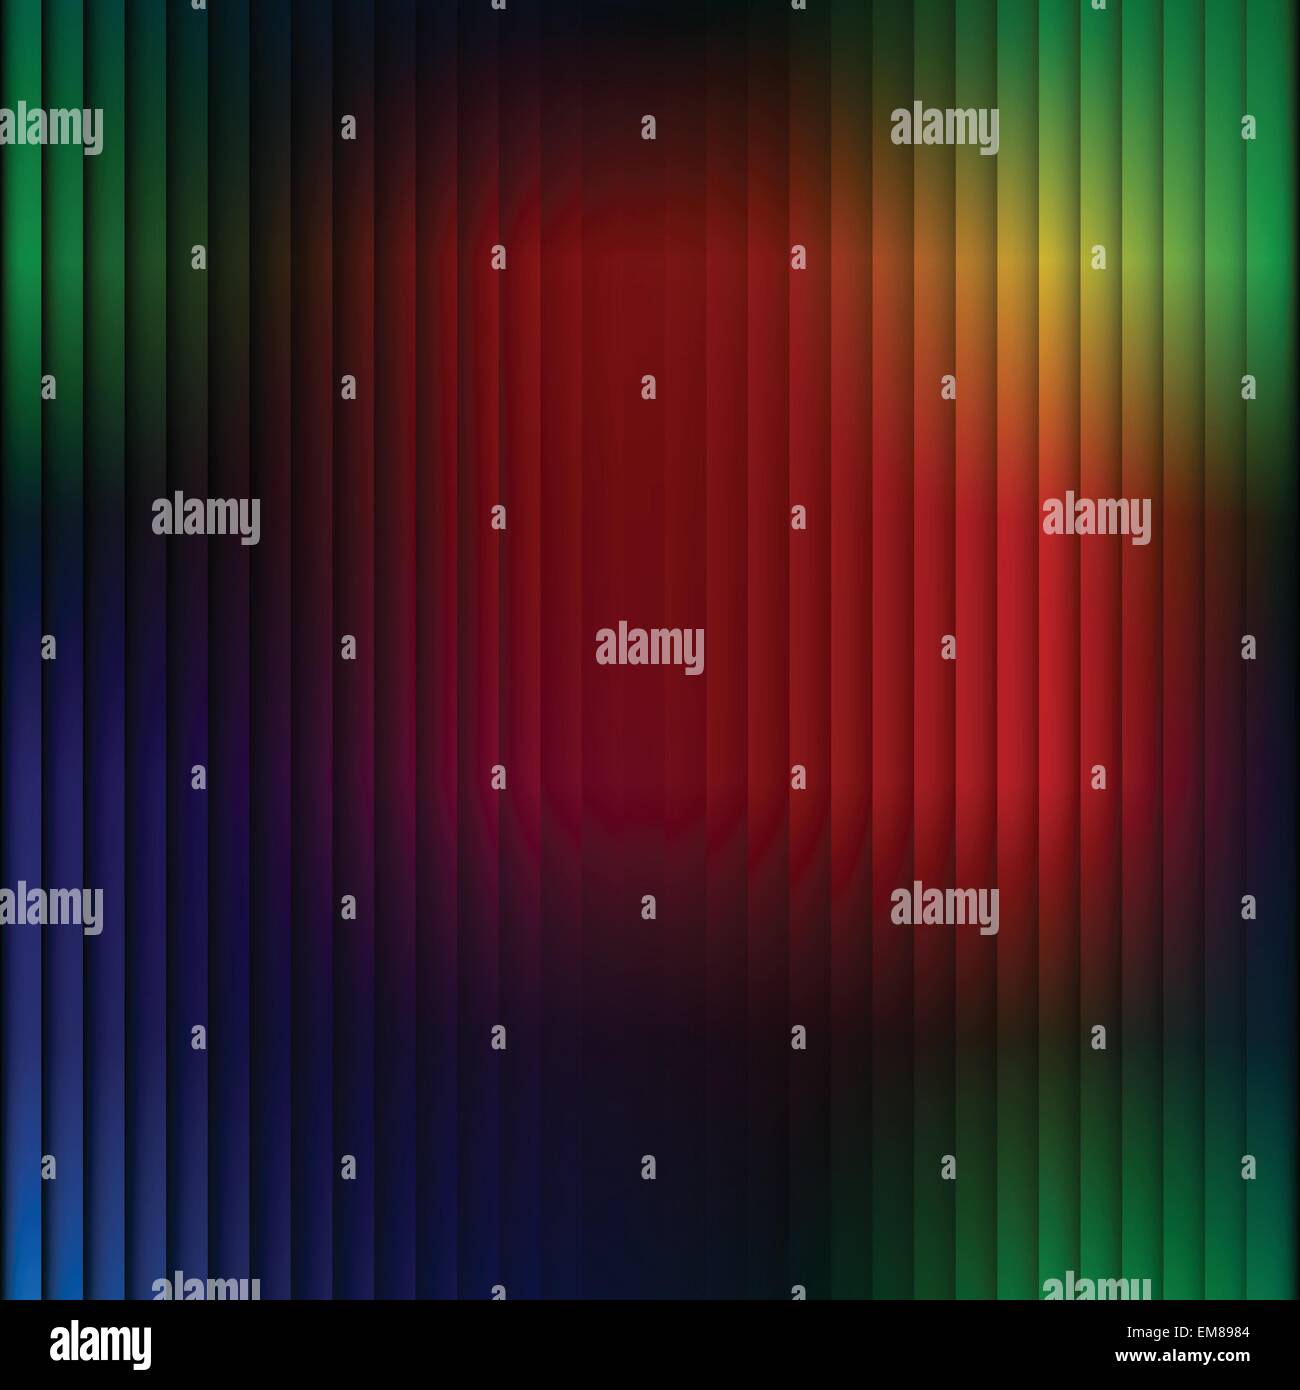 Rainbow Background Colorful Stripe Vector Stock Vector